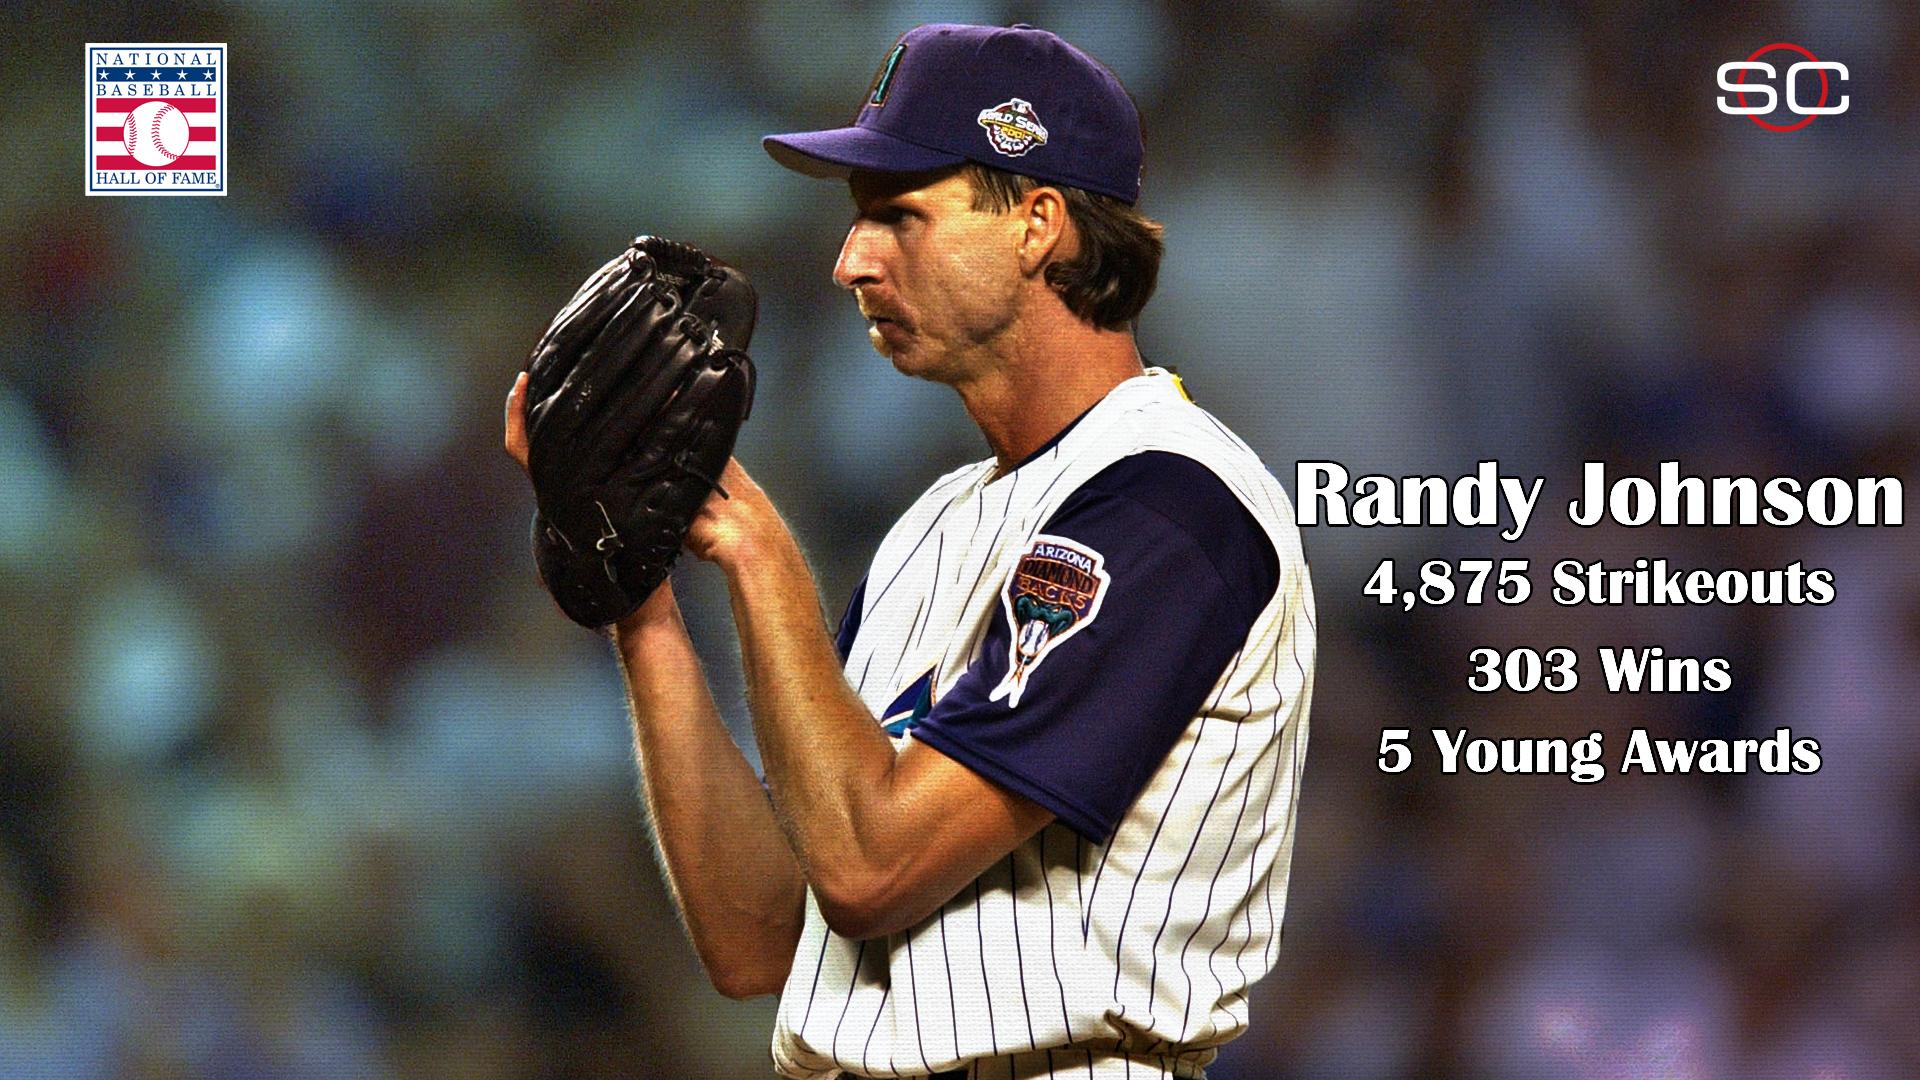 SportsCenter on X: It's your turn Big Unit! Randy Johnson is now